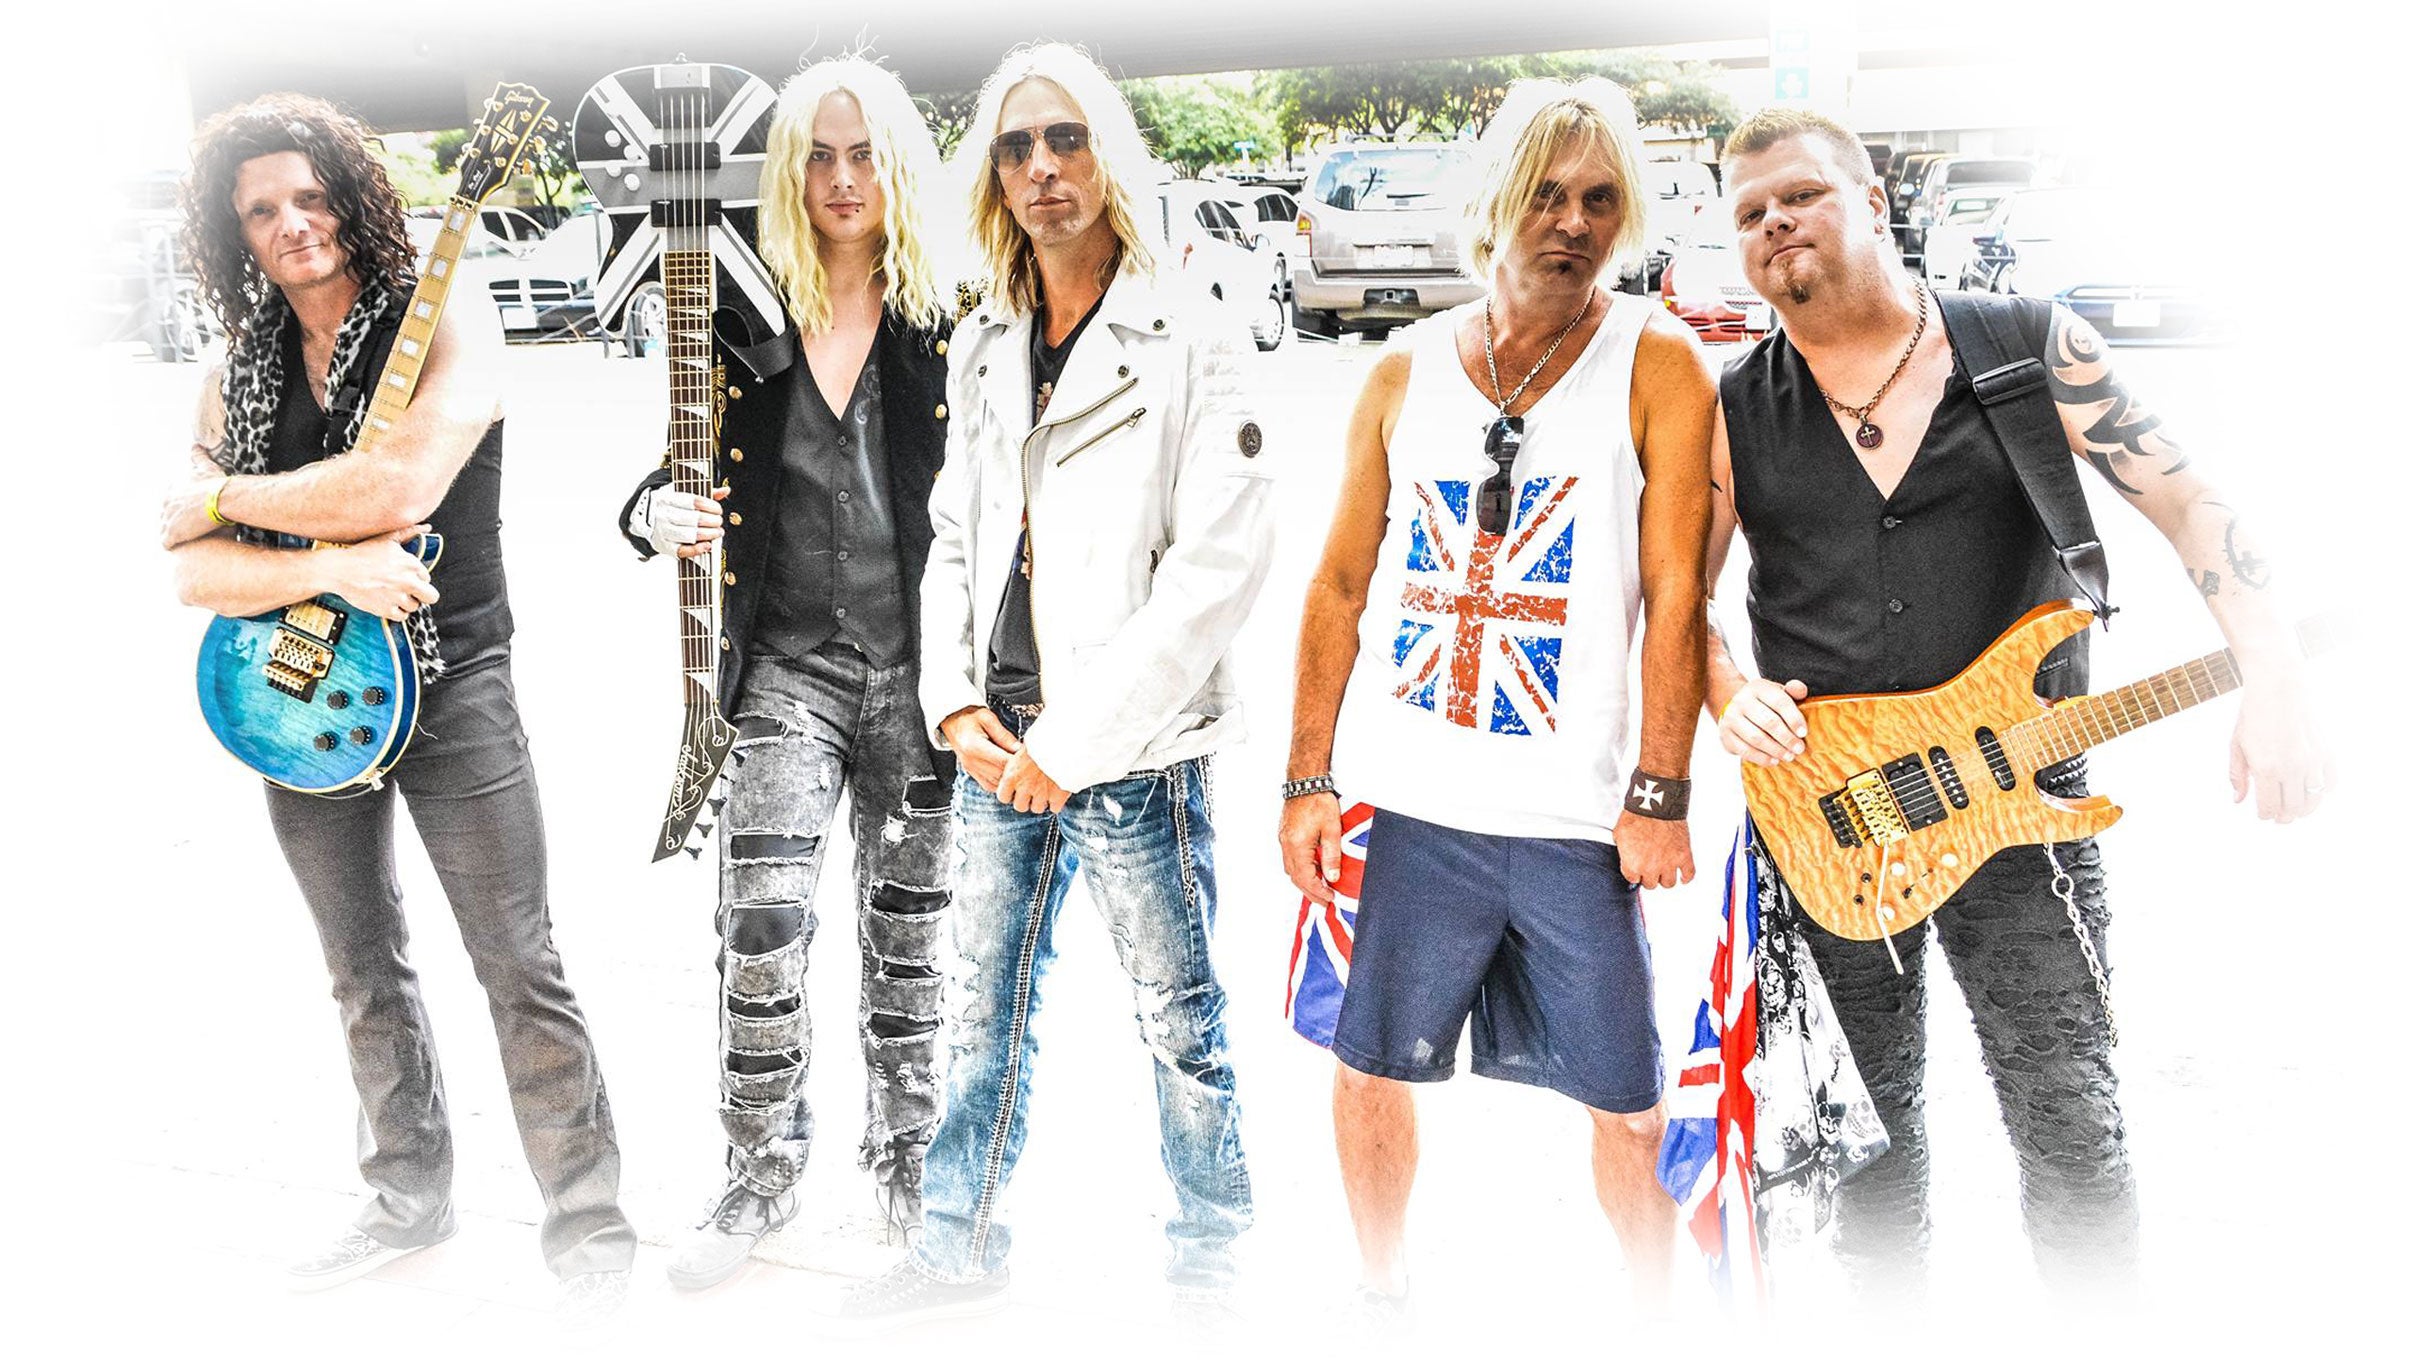 Def Leggend - The World's Greatest Tribute To Def Leppard in Louisville promo photo for Live Nation presale offer code